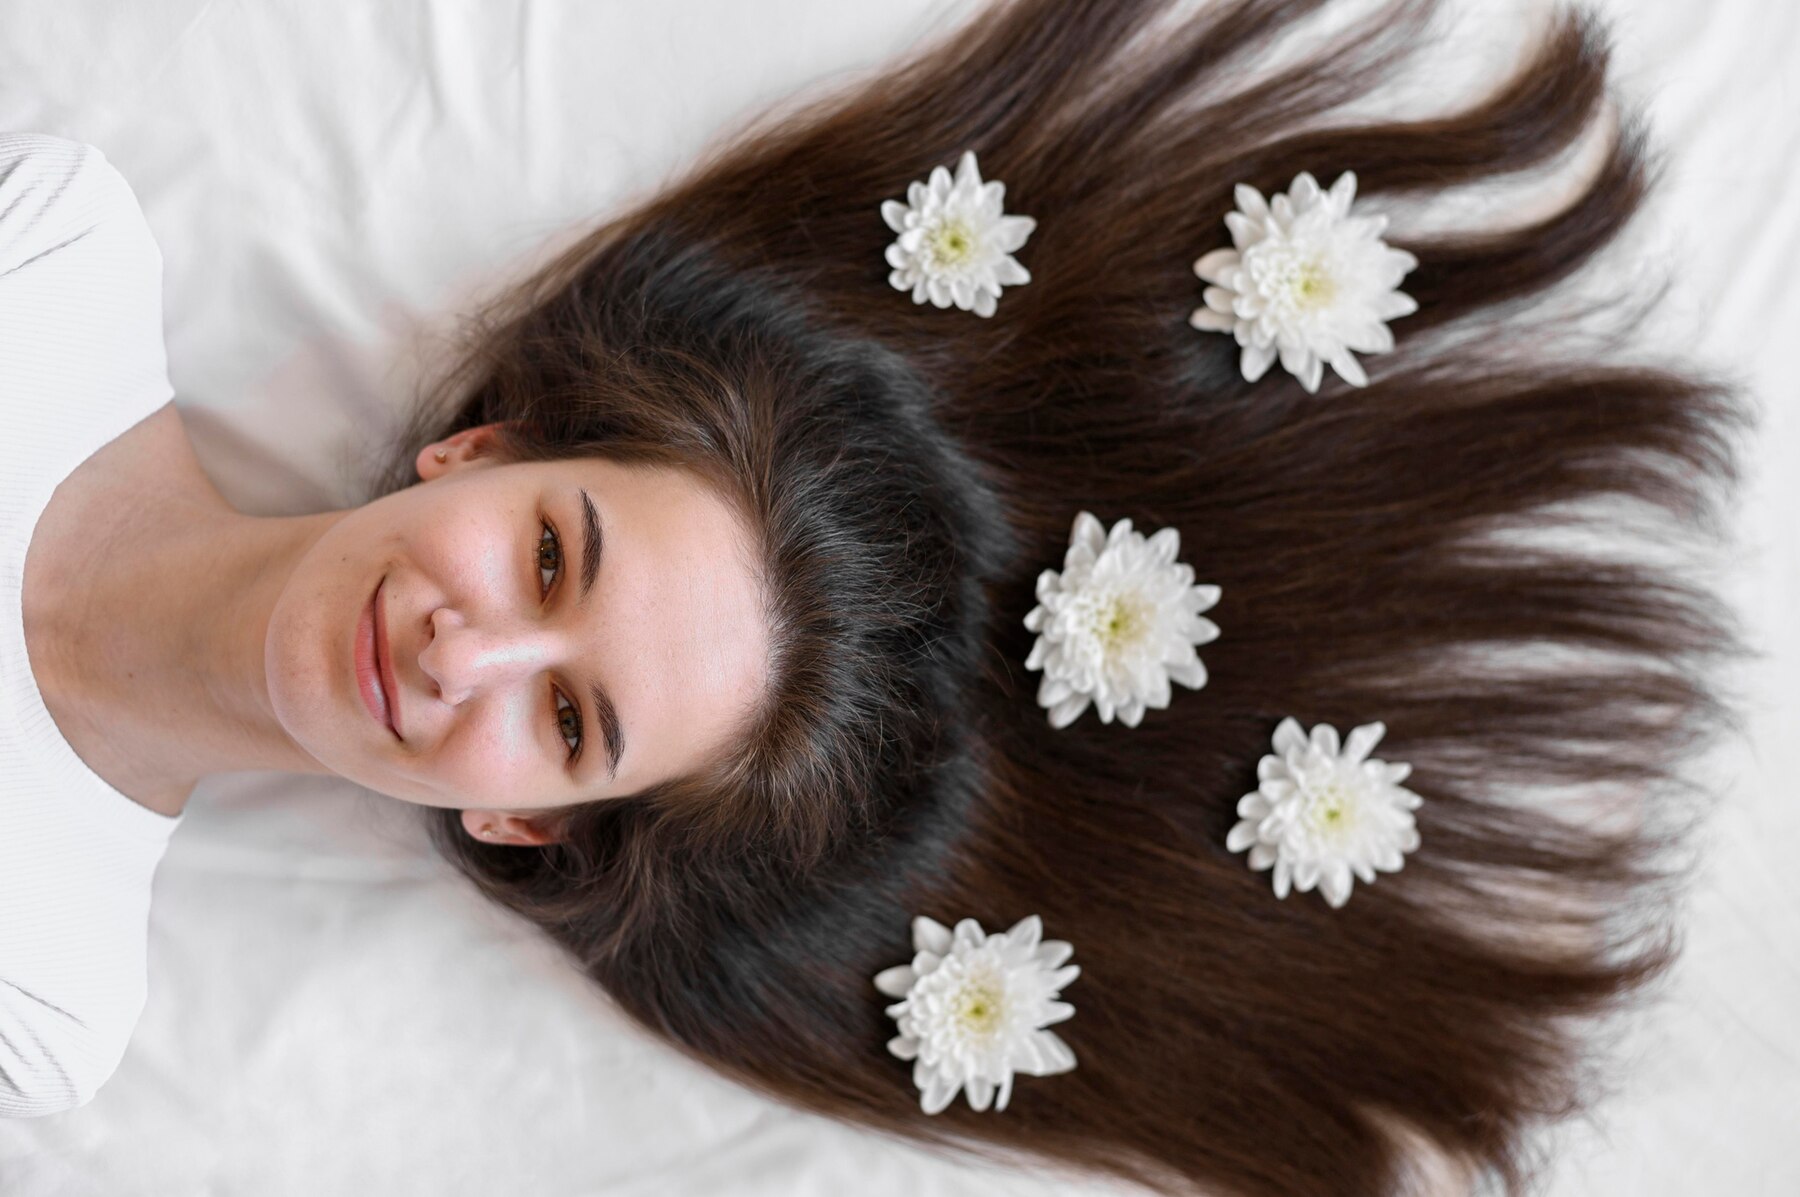 Natural Remedies for Hair and Skin Care